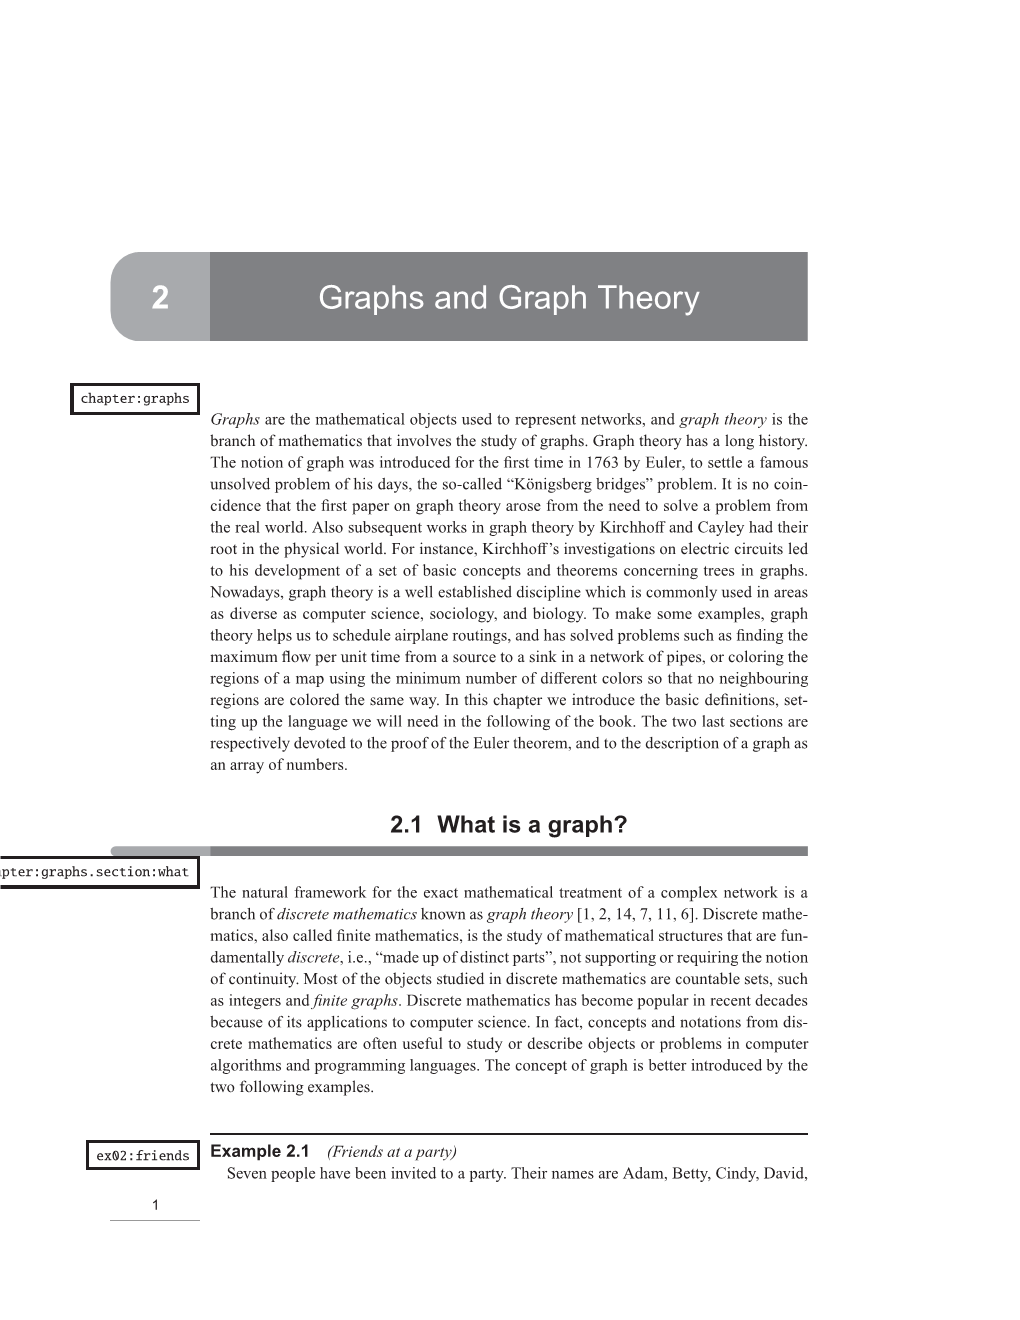 2 Graphs and Graph Theory